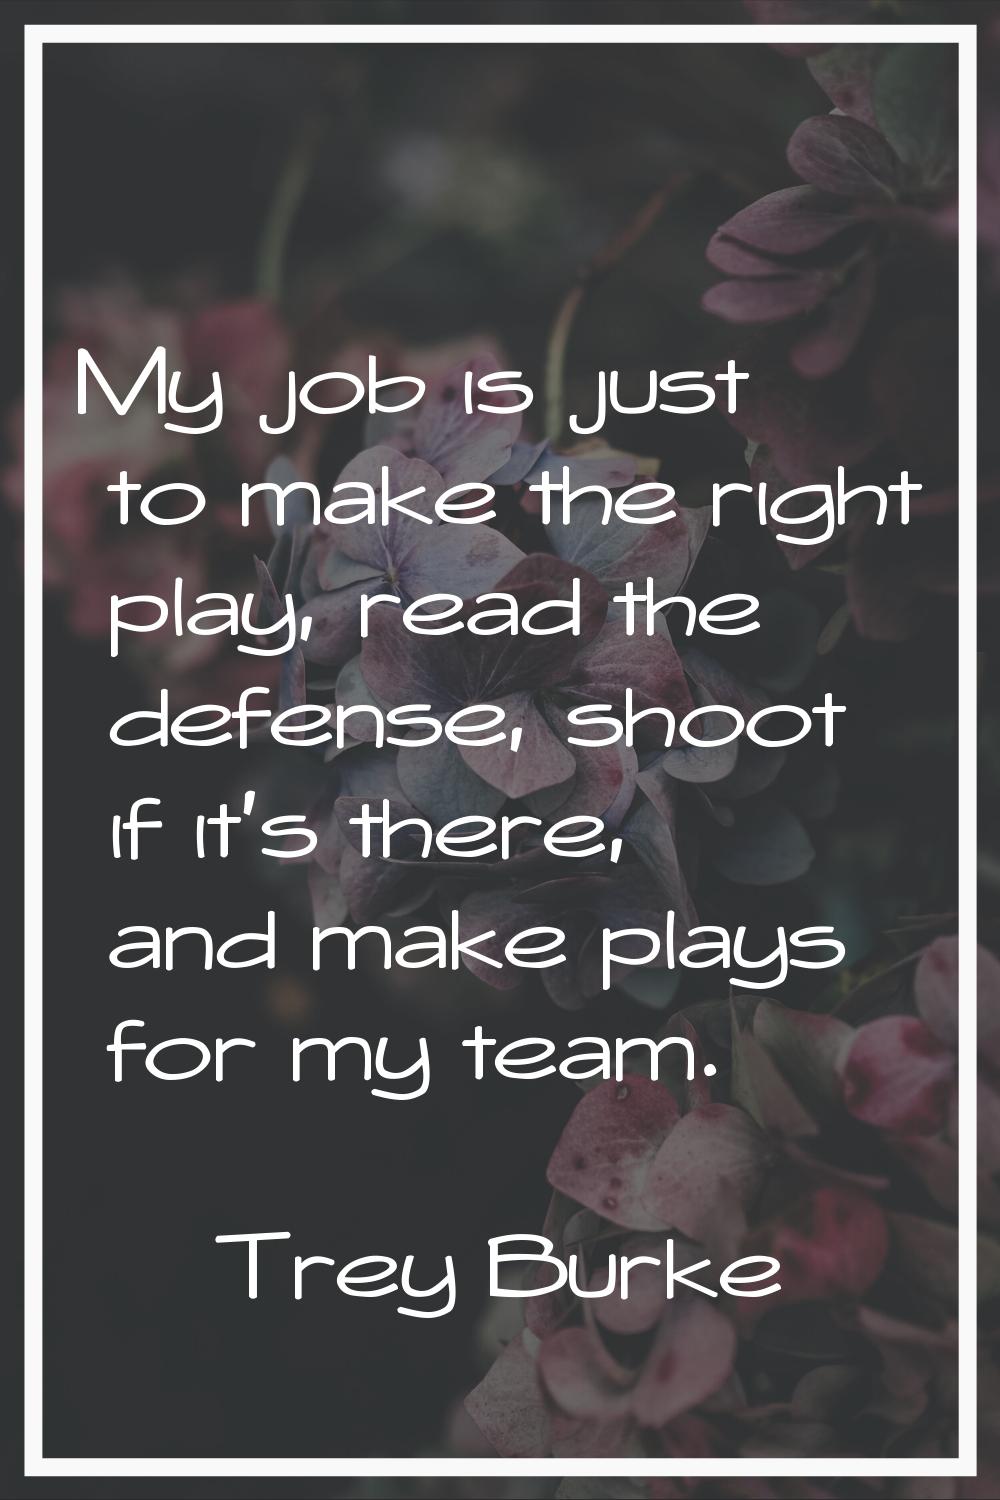 My job is just to make the right play, read the defense, shoot if it's there, and make plays for my